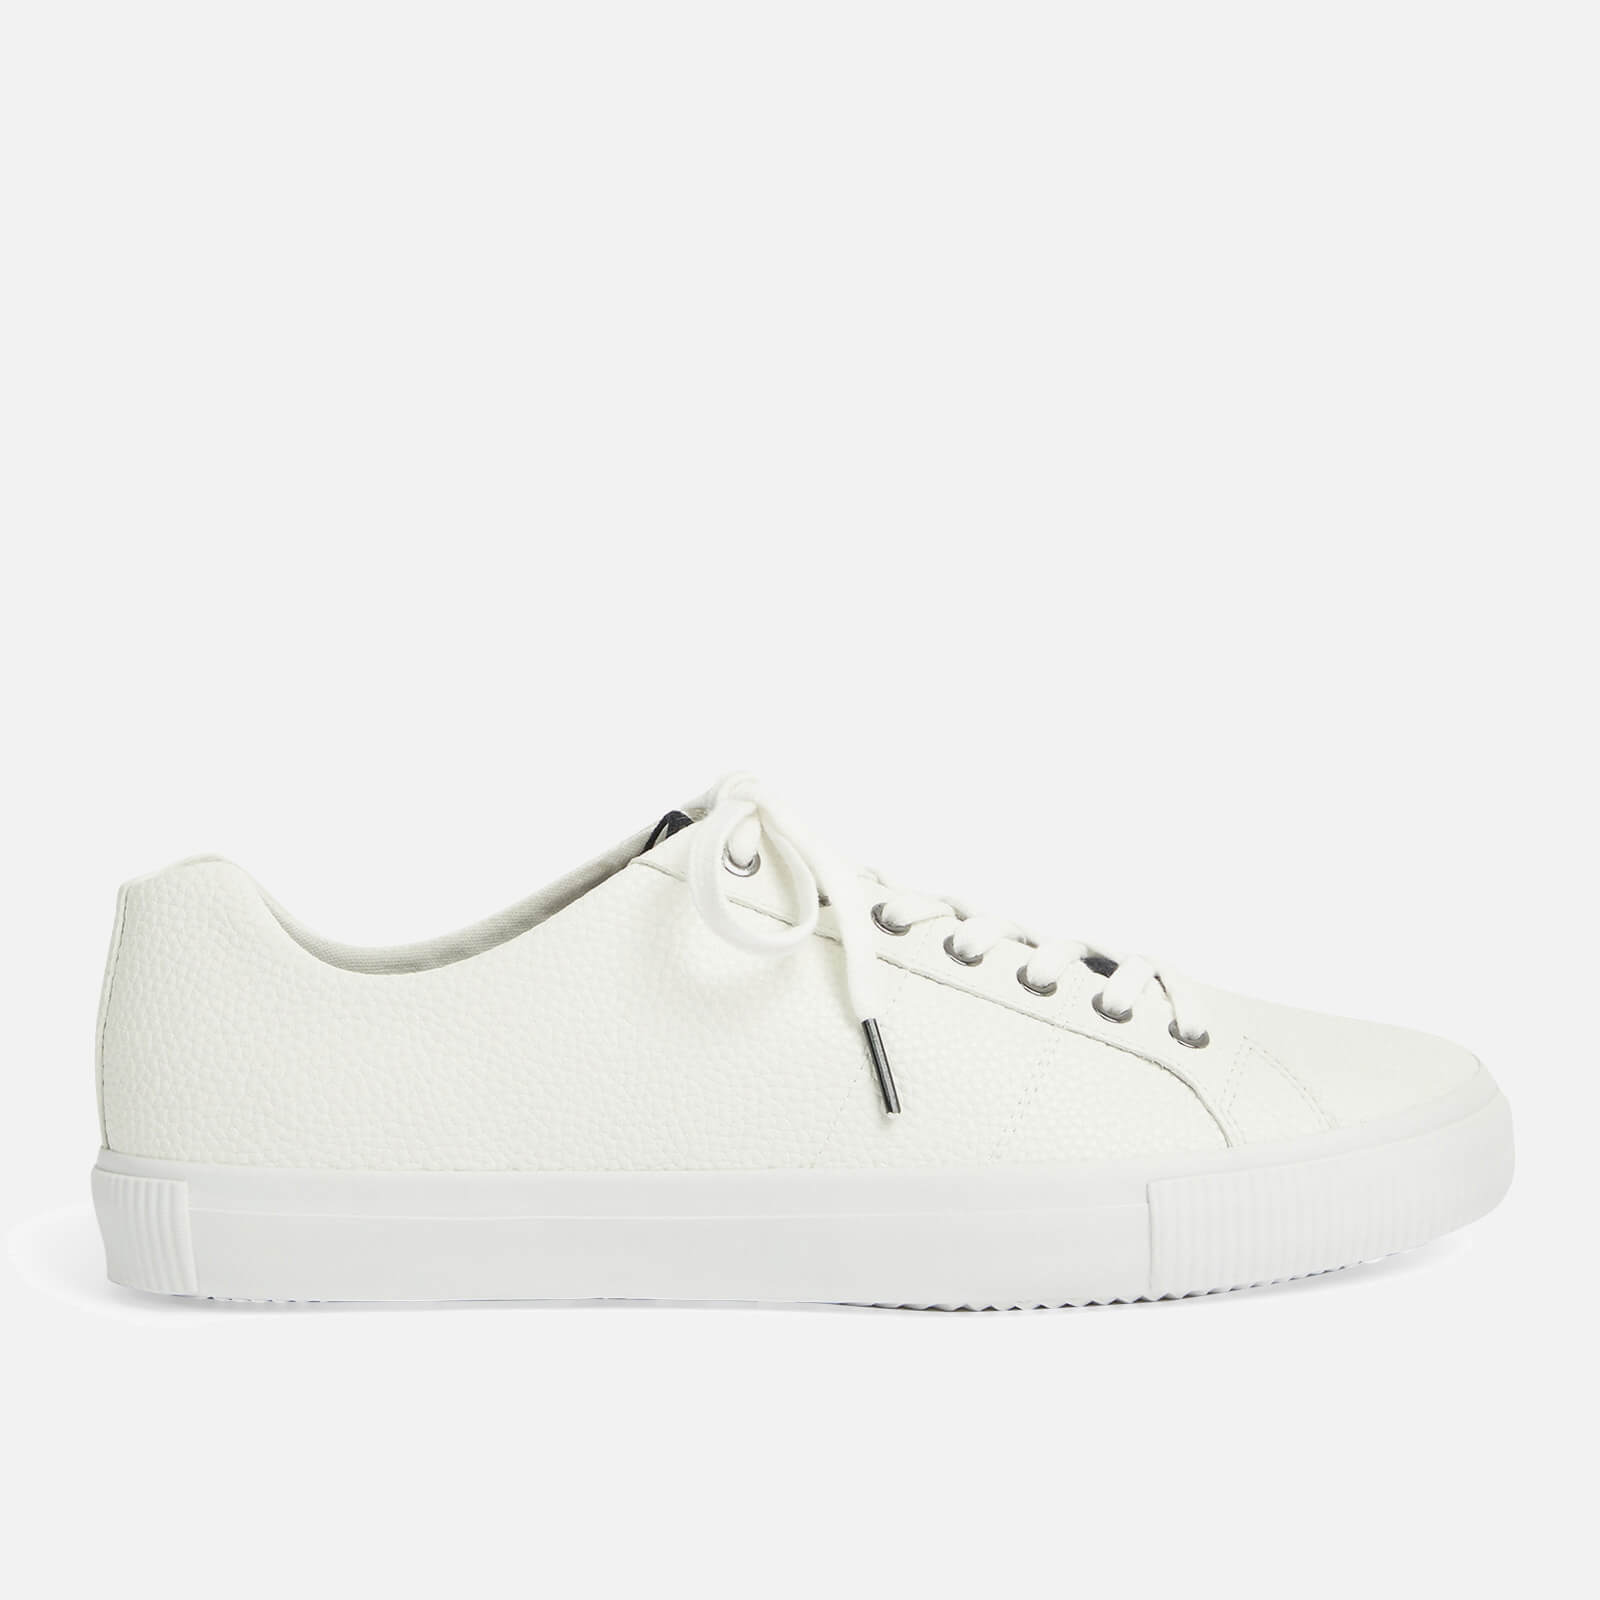 Ted Baker Men's Borage Cupsole Trainers - White - UK 7